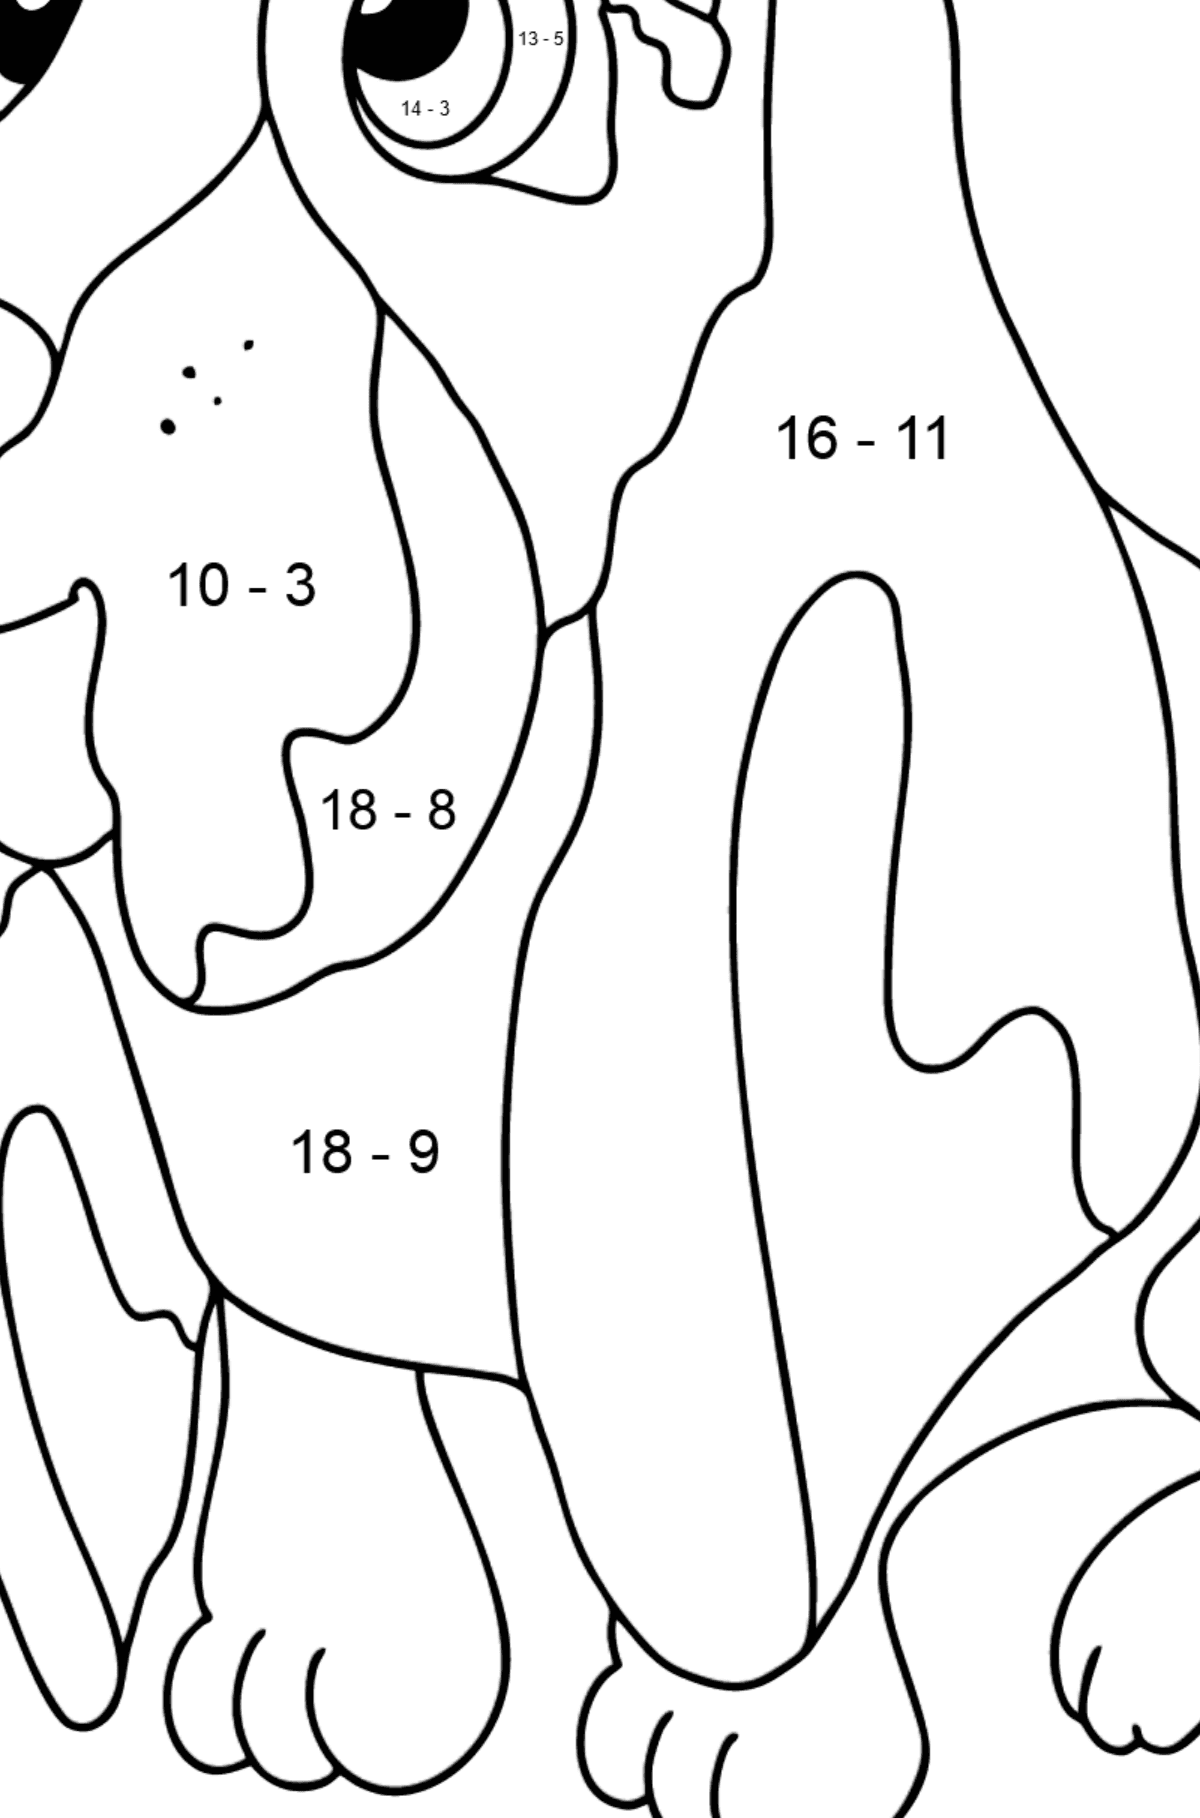 Coloring Page - A Dog is Sitting near a Bone - Math Coloring - Subtraction for Kids